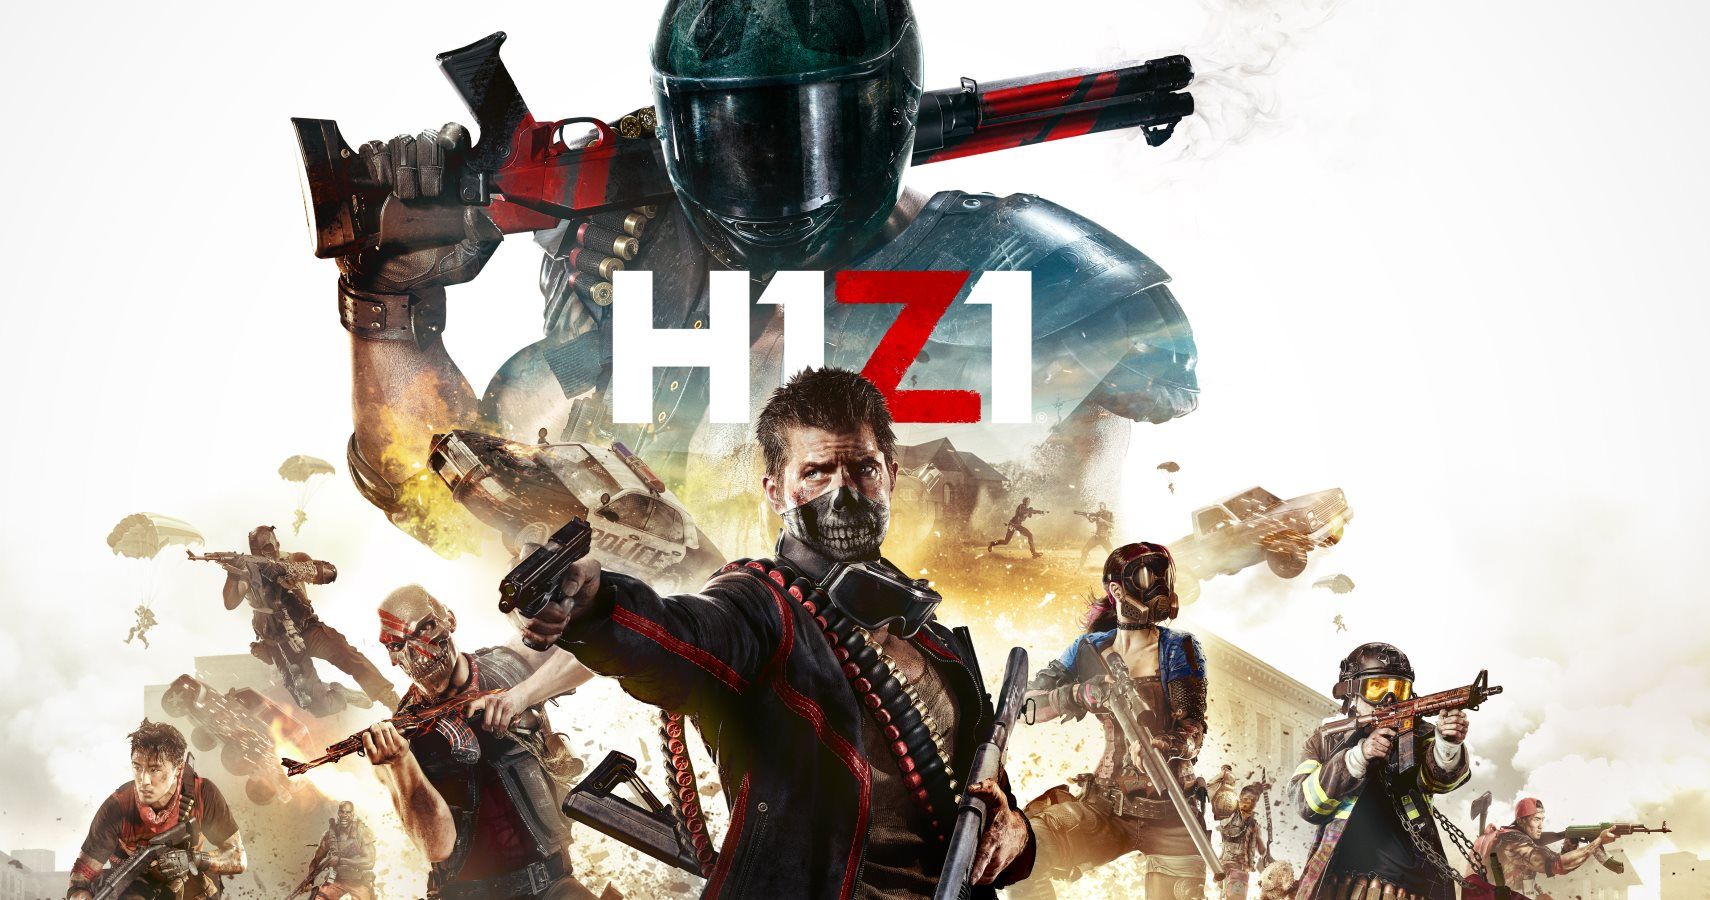 H1z1 S Player Base Dropped By 91 Since Pubg And Fortnite Took Over Battle Royale